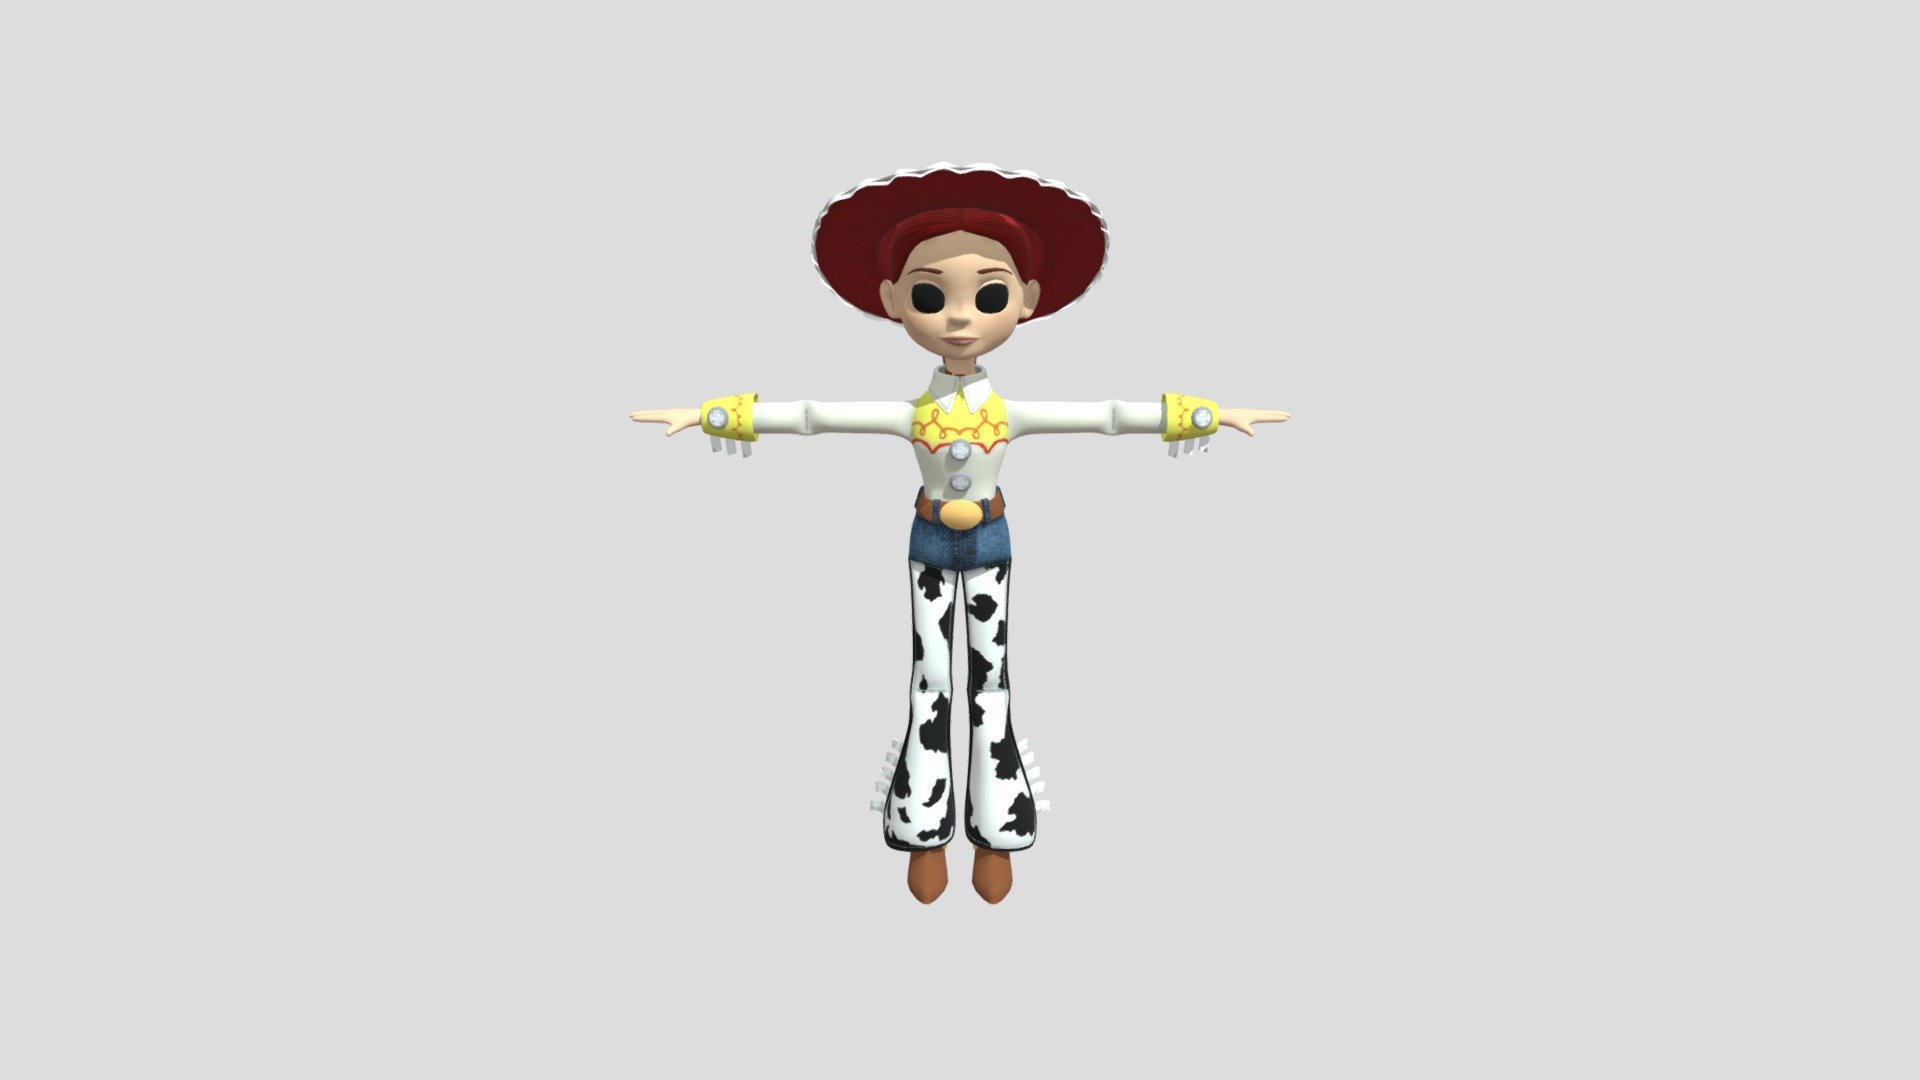 Toy story - Jessie rigged | 3D model